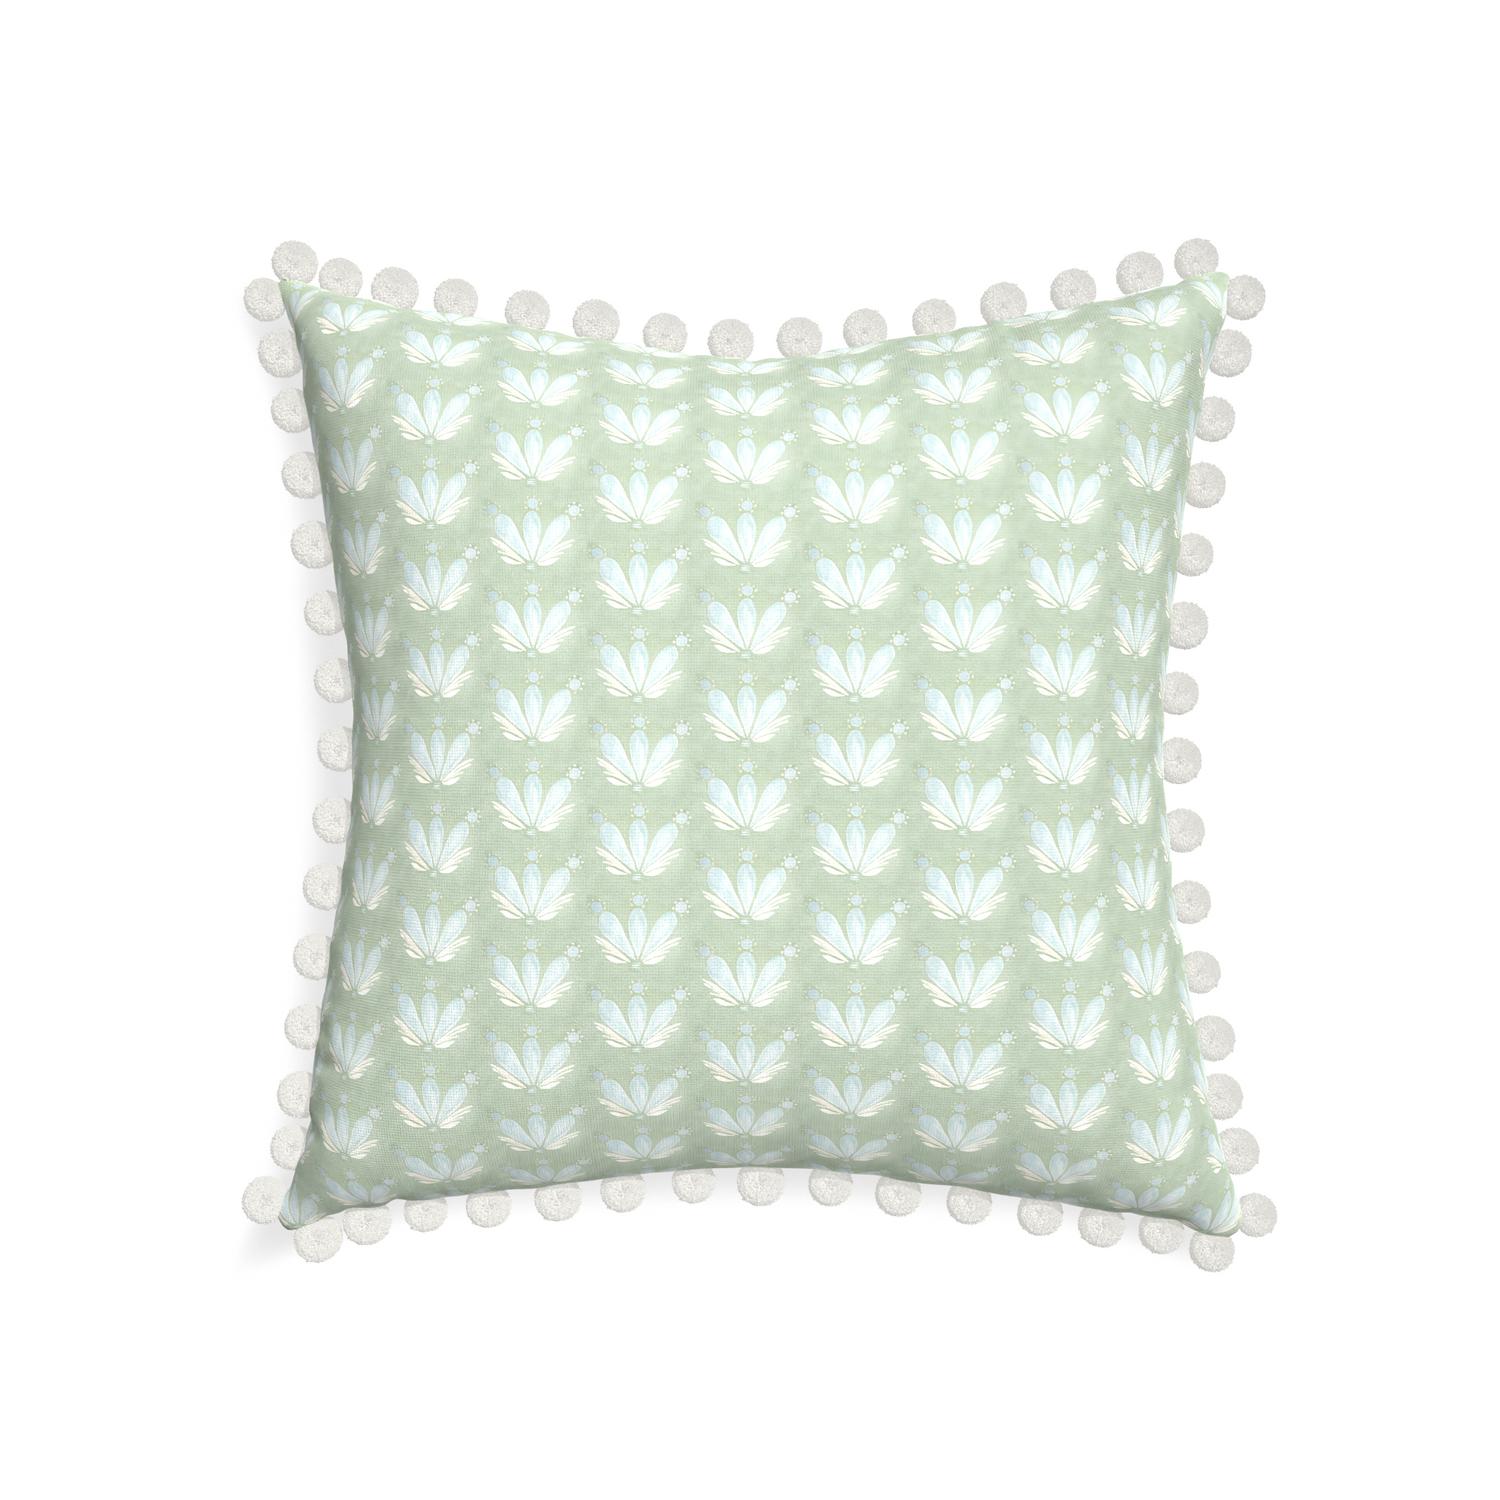 22-square serena sea salt custom blue & green floral drop repeatpillow with snow pom pom on white background